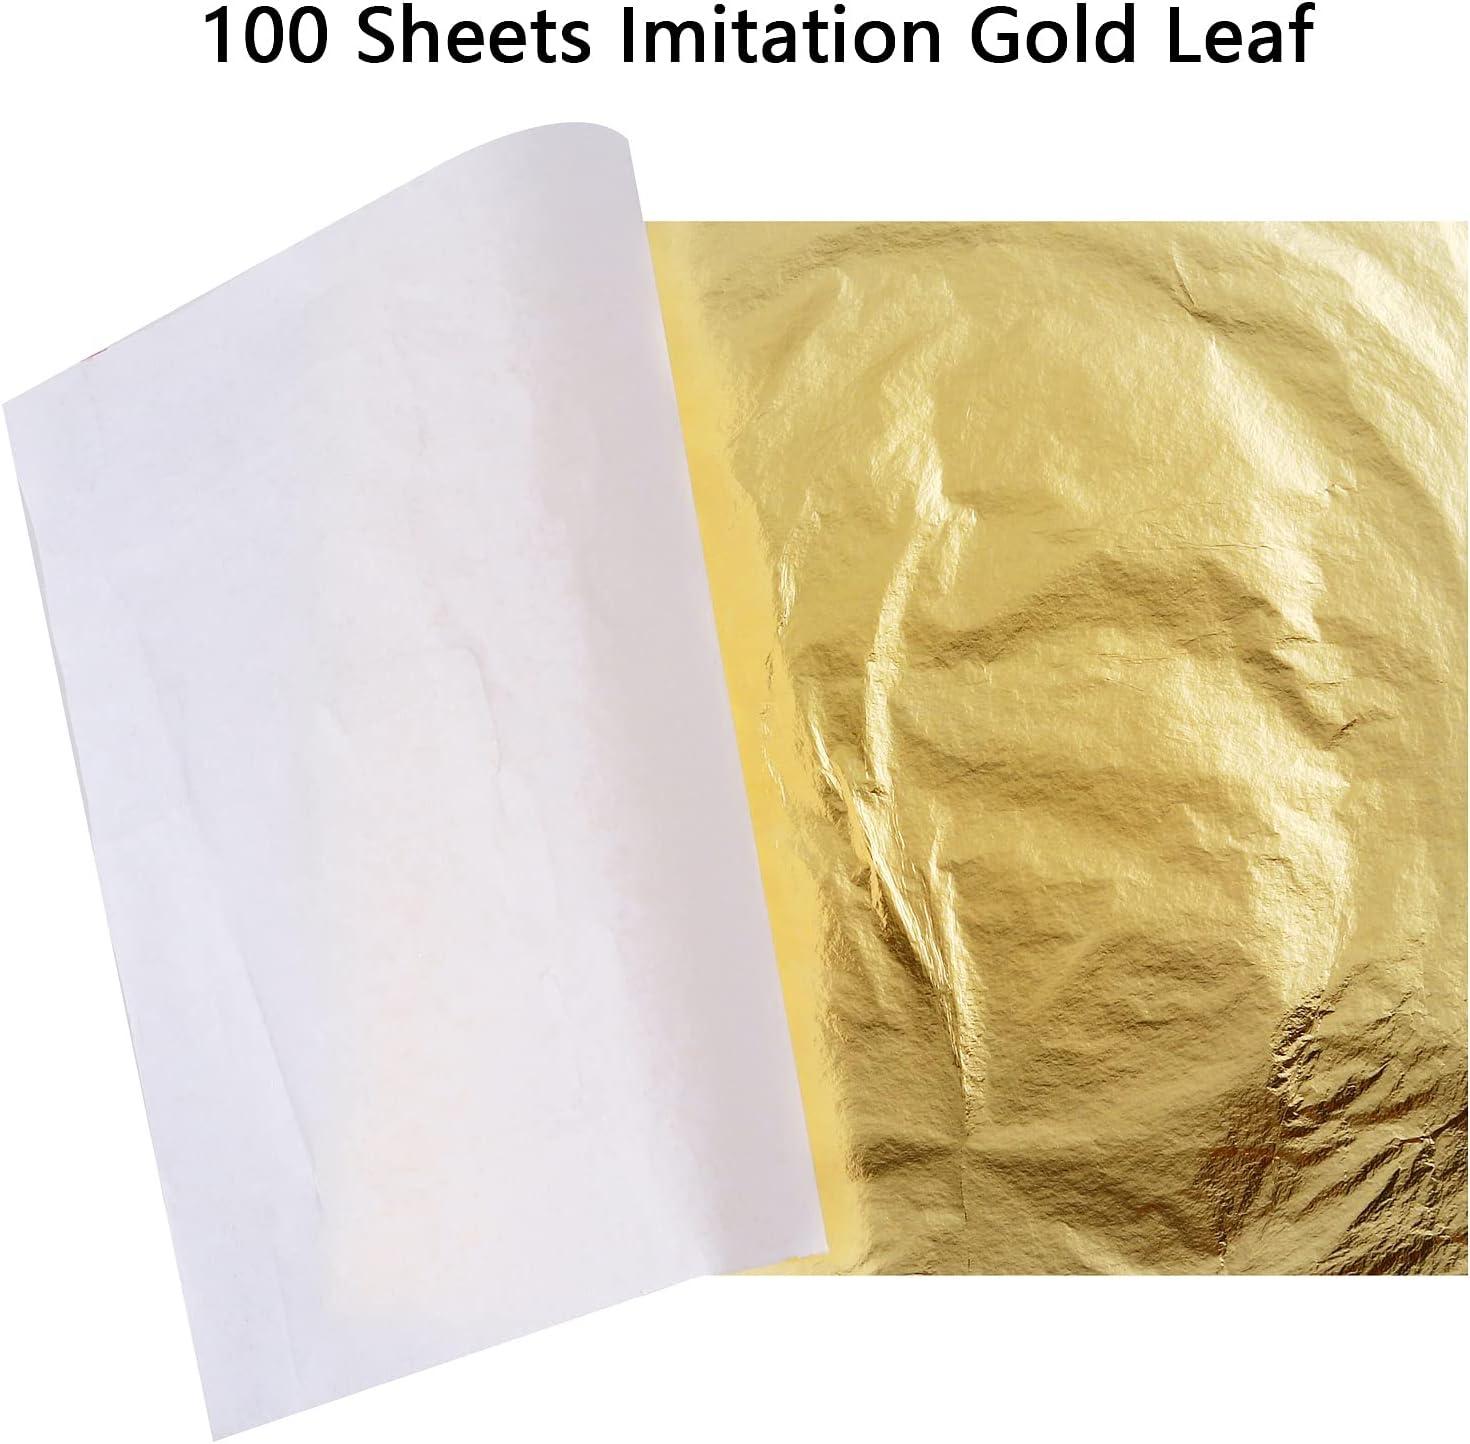 100pcs Sheets Imitation Gold Silver Foil Paper Leaf Gilding DIY Art Craft  Paper Birthday Party Imitation Champagne Silver Gold Leaf Sheets Gold Foils  Sheets For Paint Resin Arts Crafting Decoration